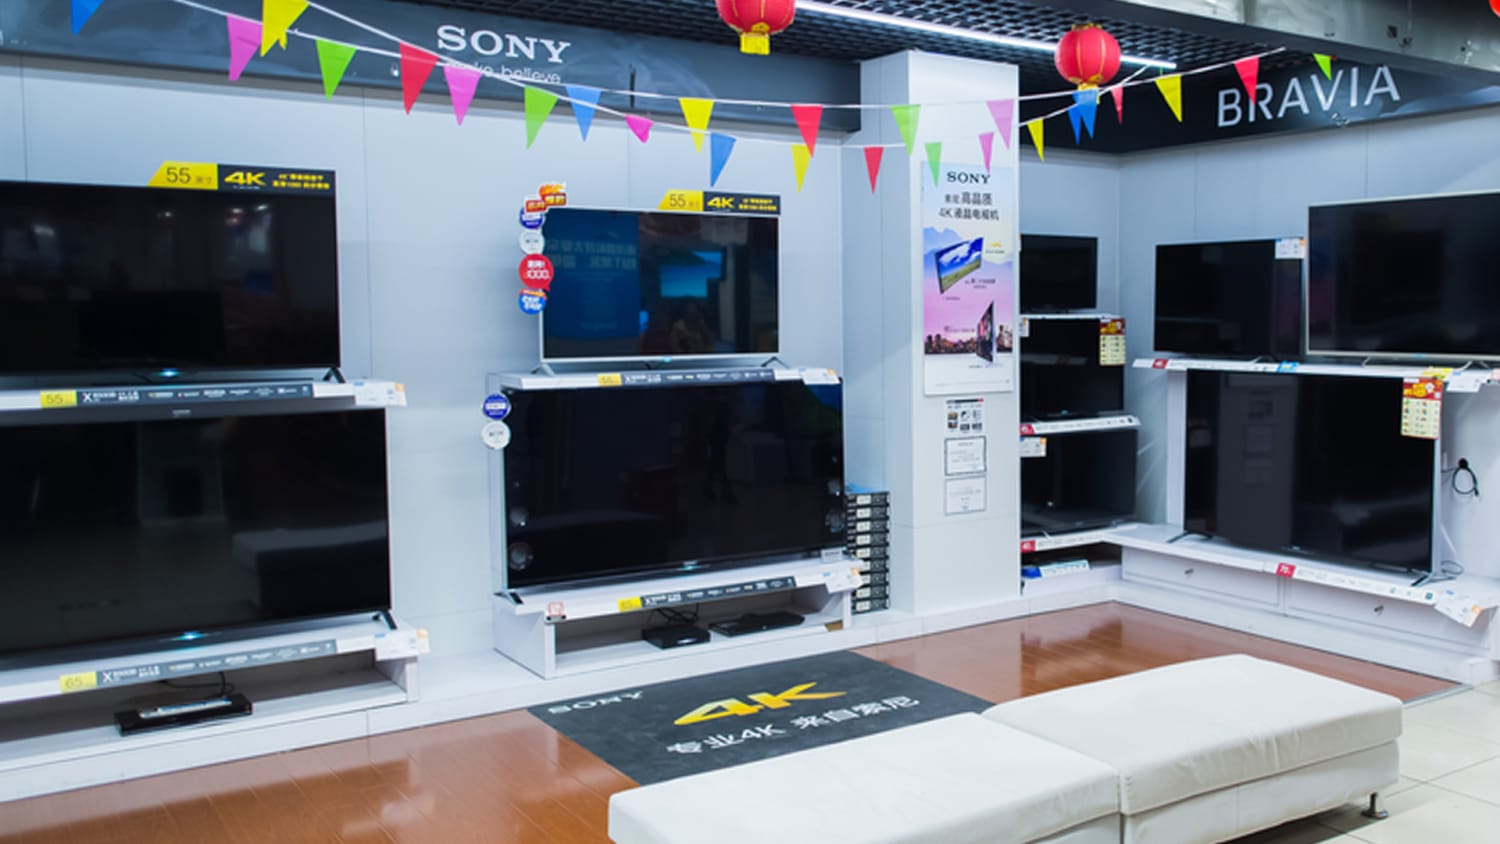 Buying a TV on Black Friday? Beware the door-buster deal - 0